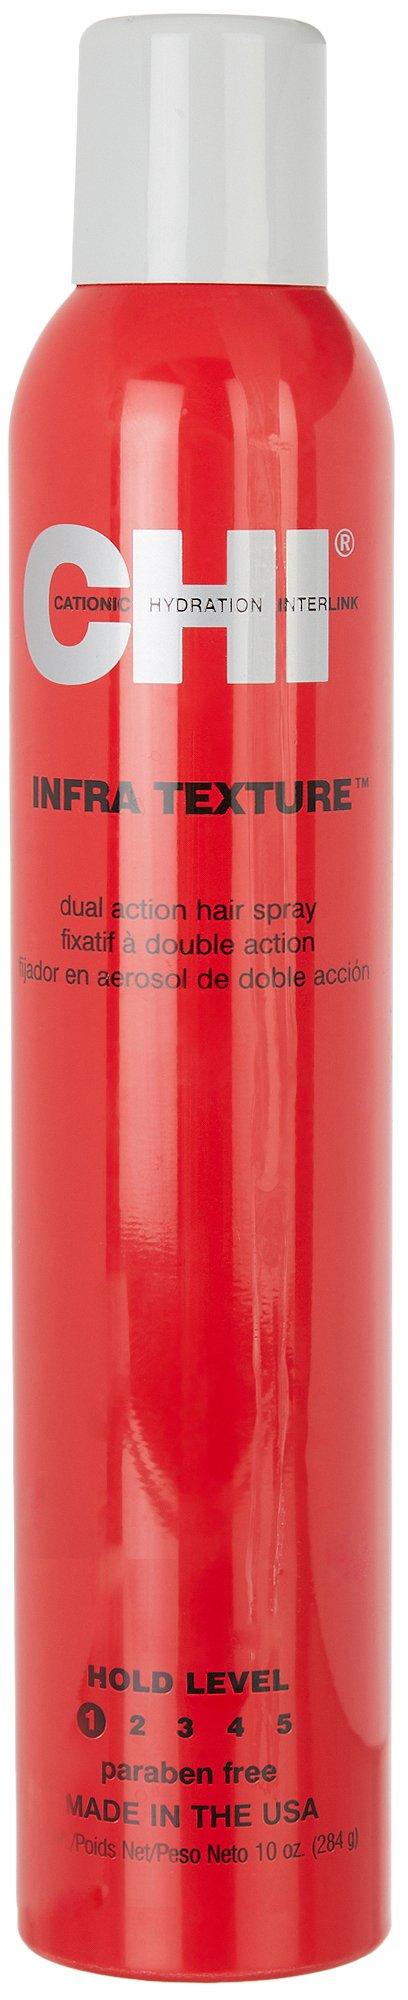 Chi Infra Texture Dual Action Hair Spray 10